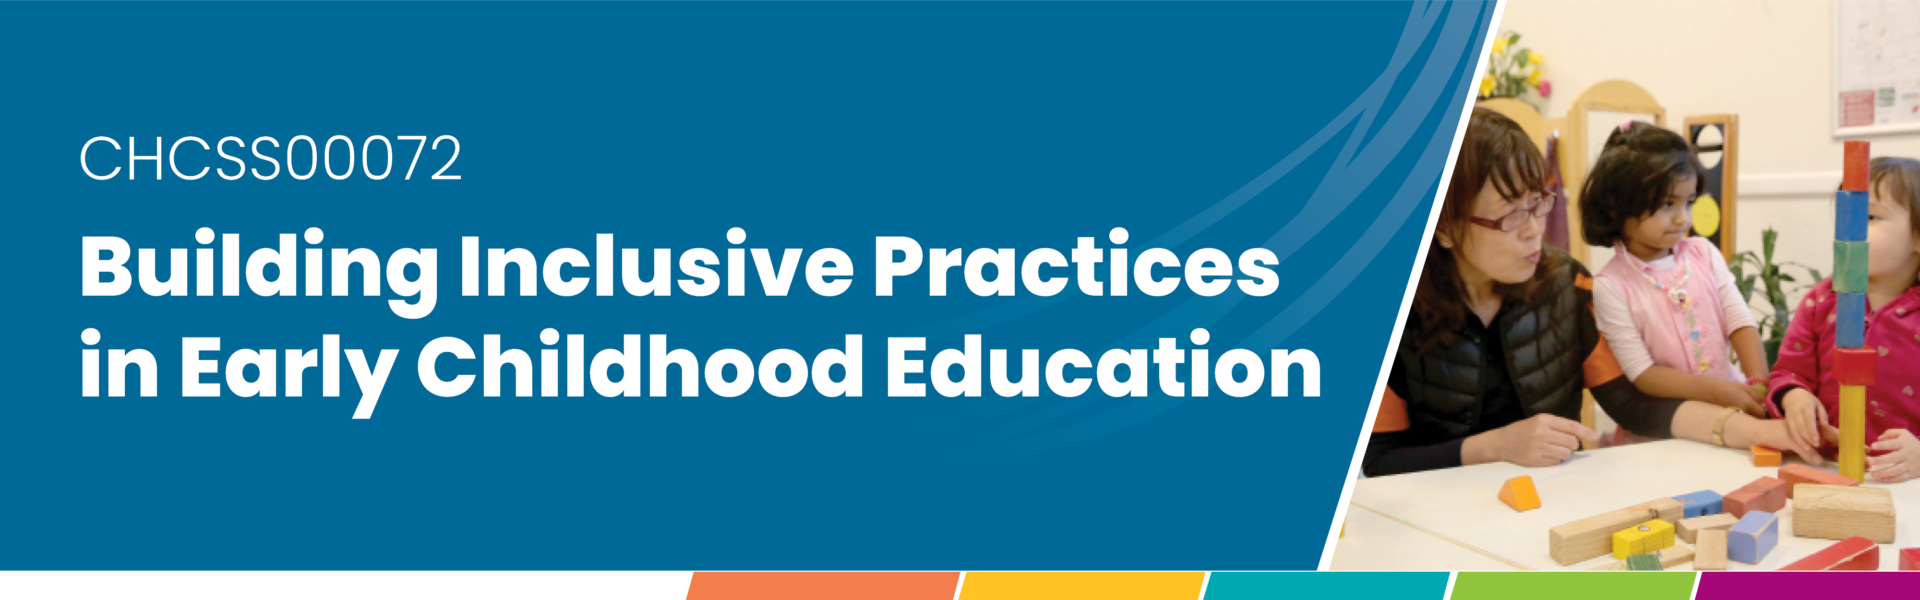 Communities@Work - Building Inclusive Practices in Early Childhood Education - RTO Course